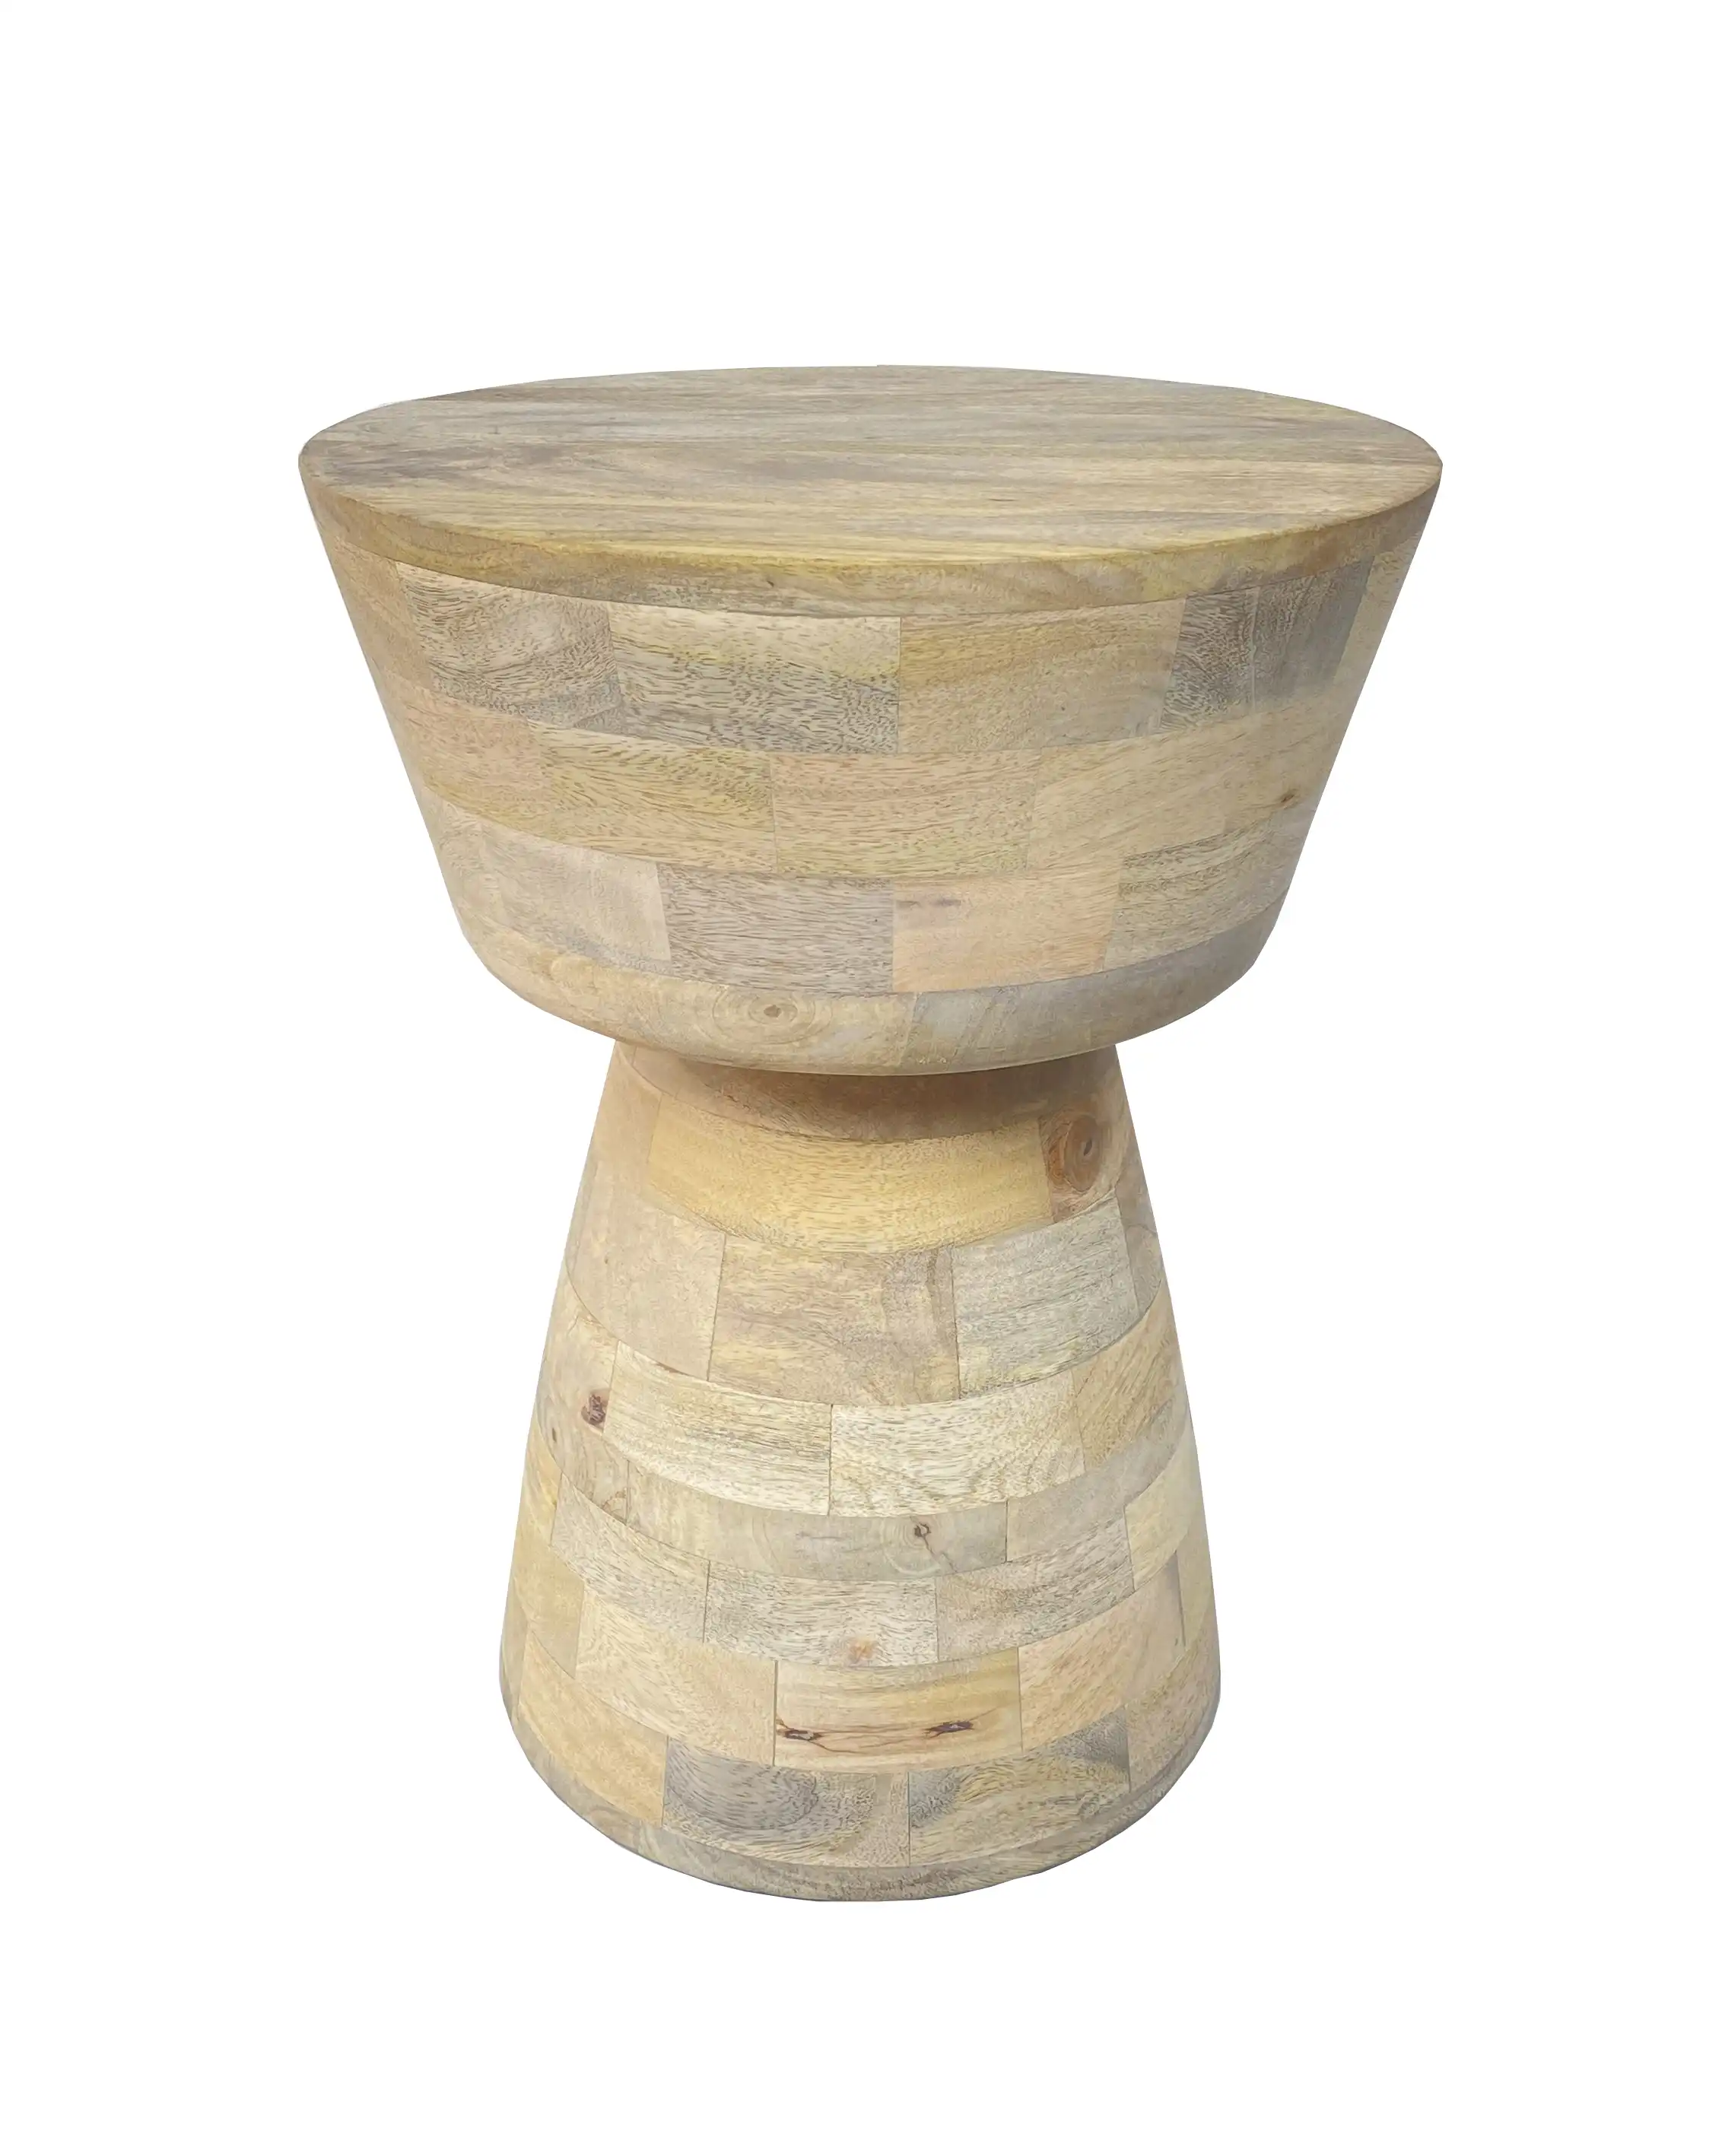 Wooden Hand Carved Side Table / Accent Table - popular handicrafts